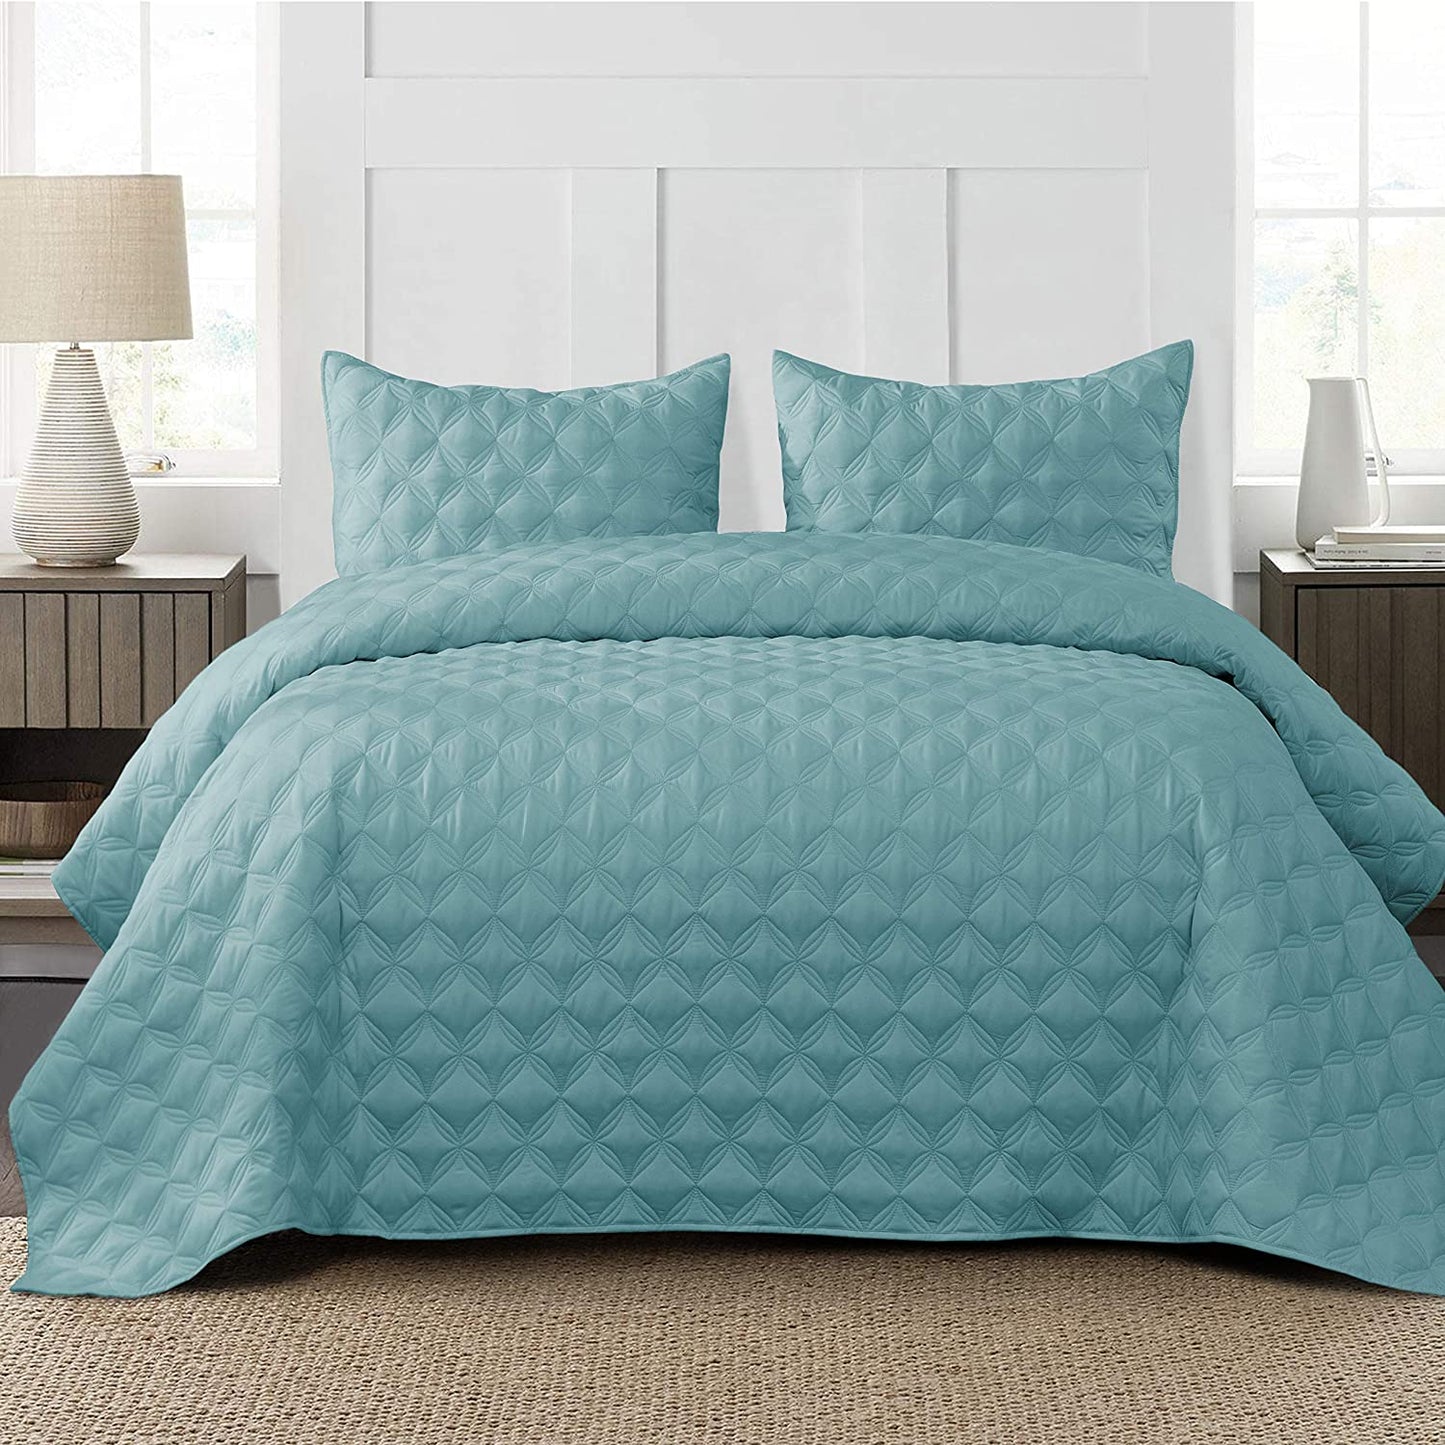 Exclusivo Mezcla 3-Piece King/Queen/Full/Twin Size Quilt Set with Pillow Shams, Ellispe Quilted Bedspread/Coverlet/Bed Cover -Soft, Lightweight and Reversible